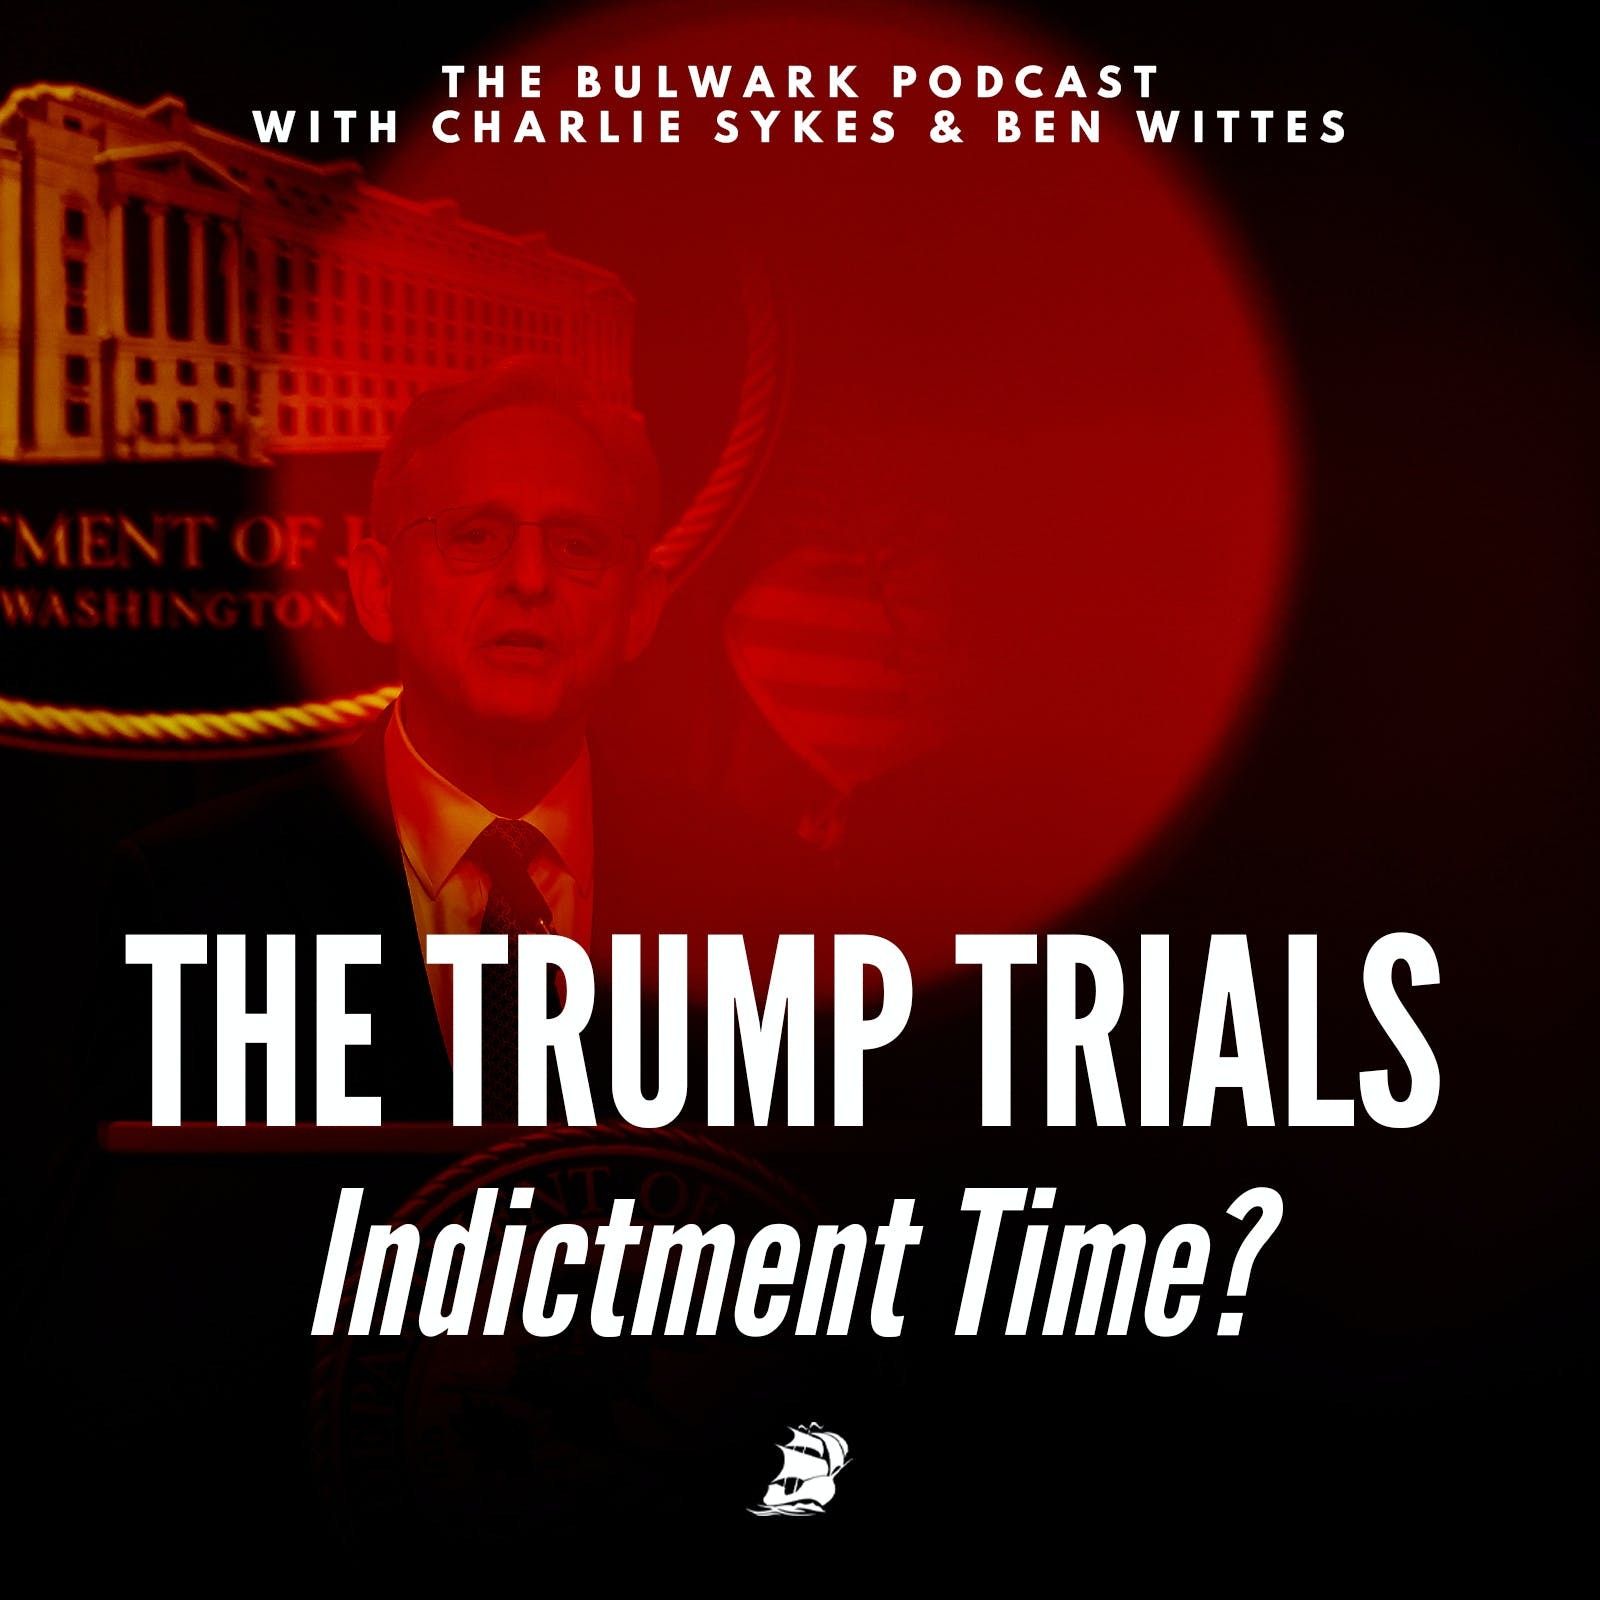 Indictment Time? by The Bulwark Podcast